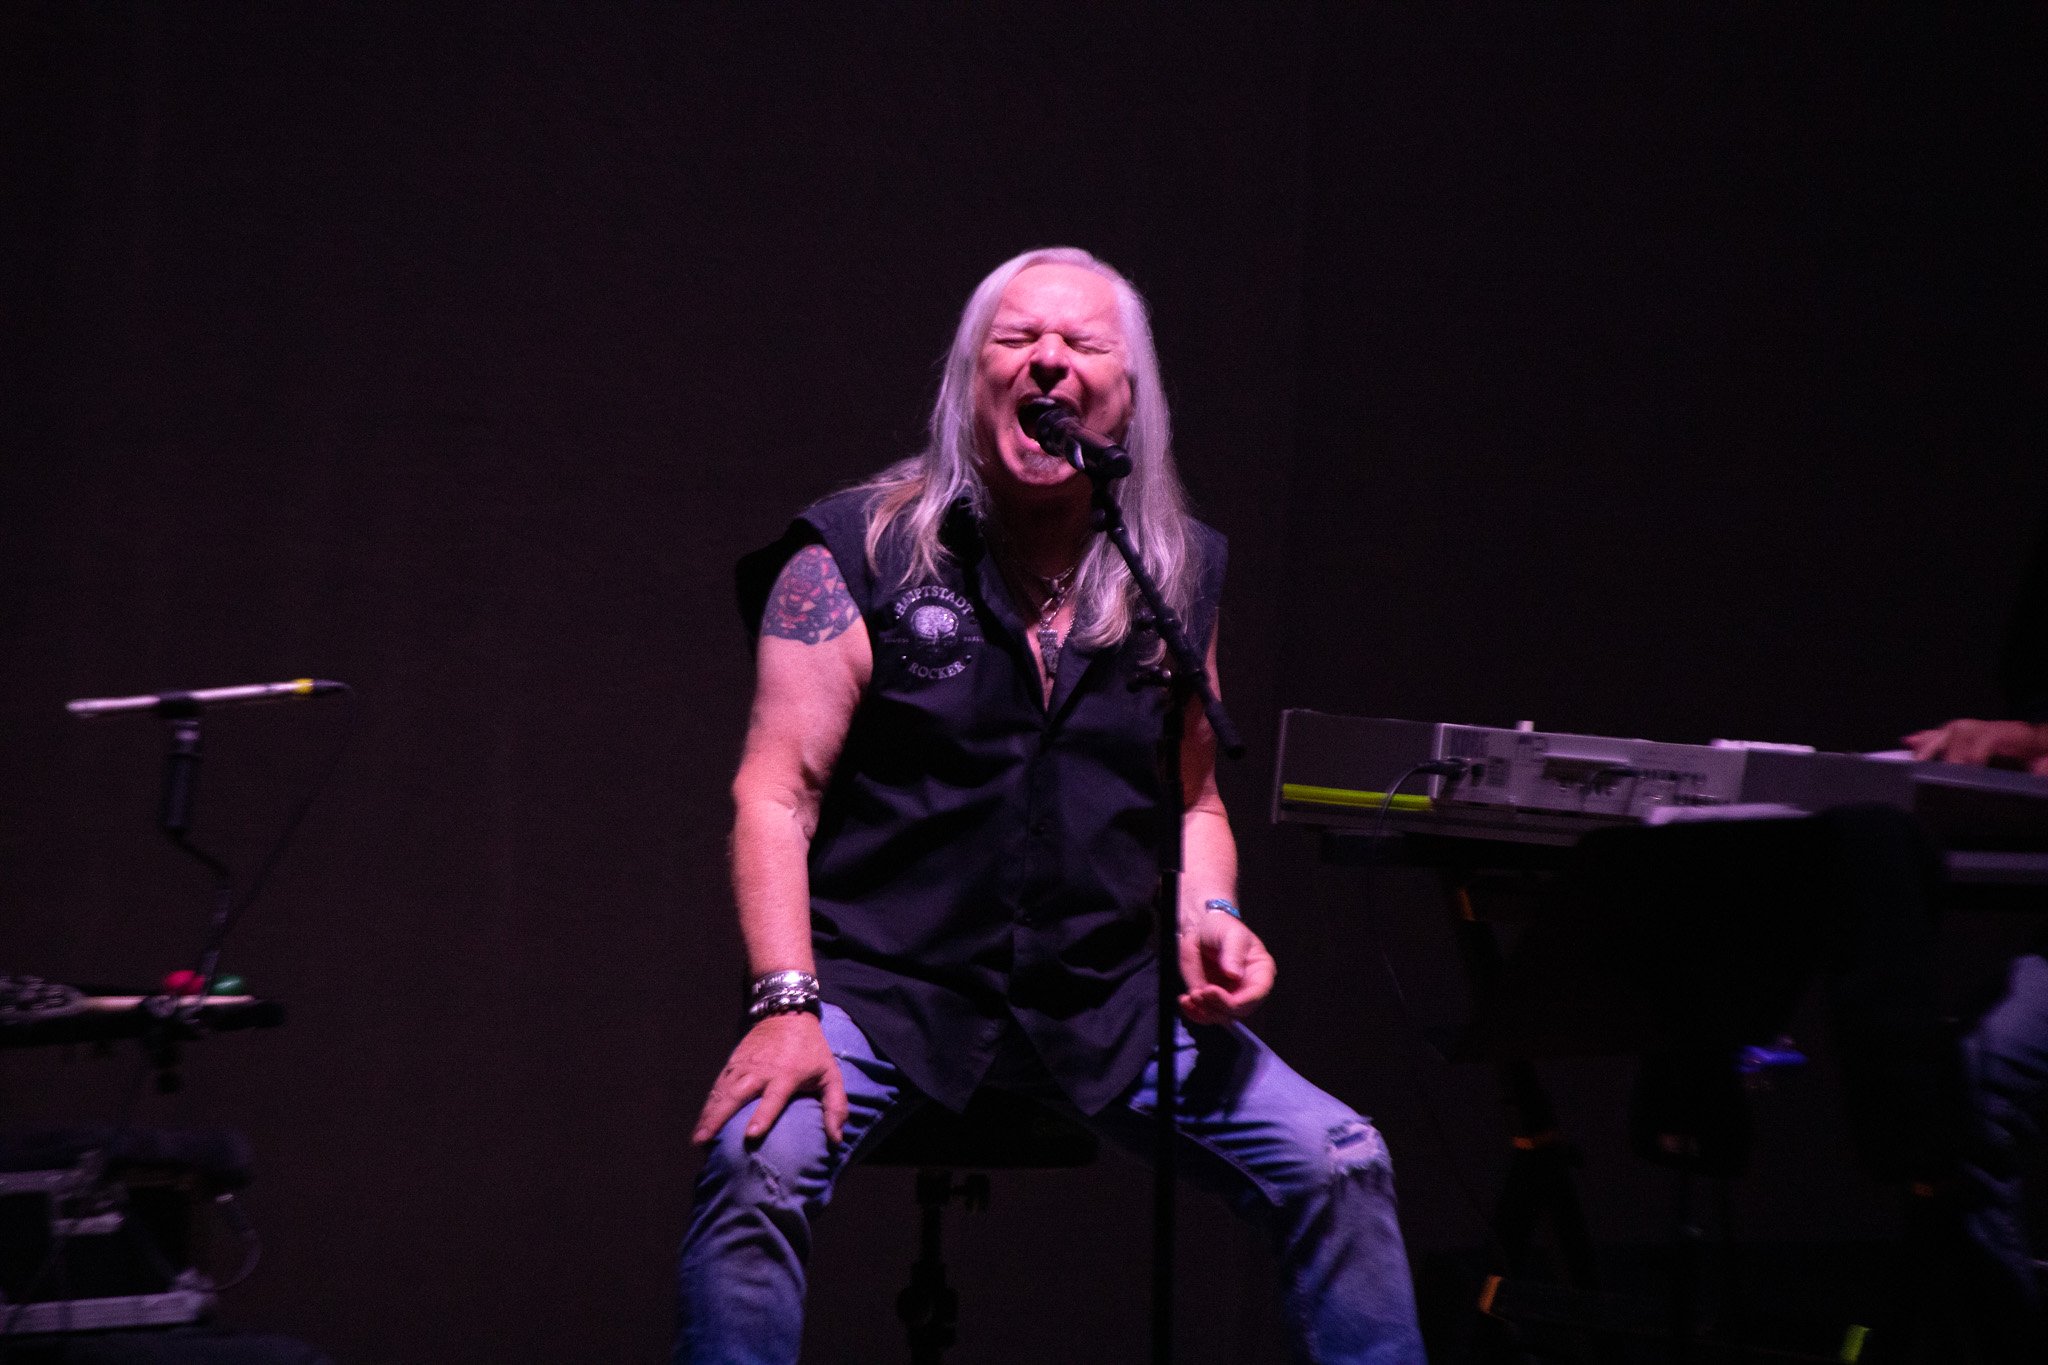 Uriah Heep at The Bridgewater Hall in Manchester on October 3rd 